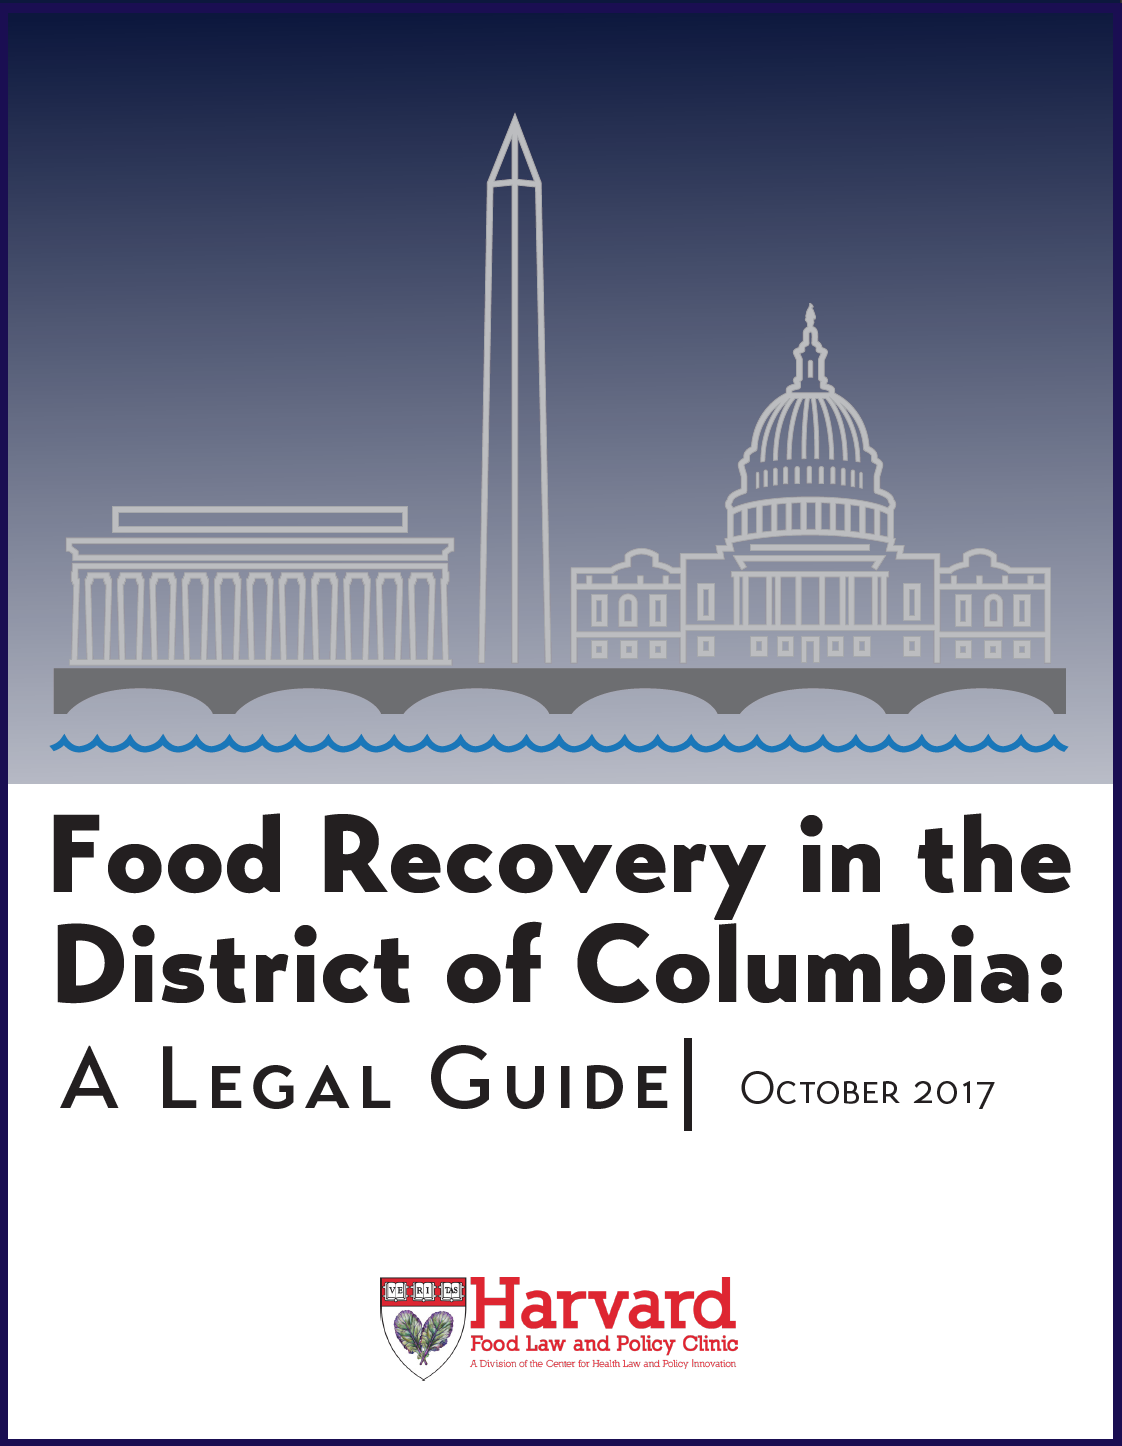 Food Recovery in the District of Columbia_legal guide cover